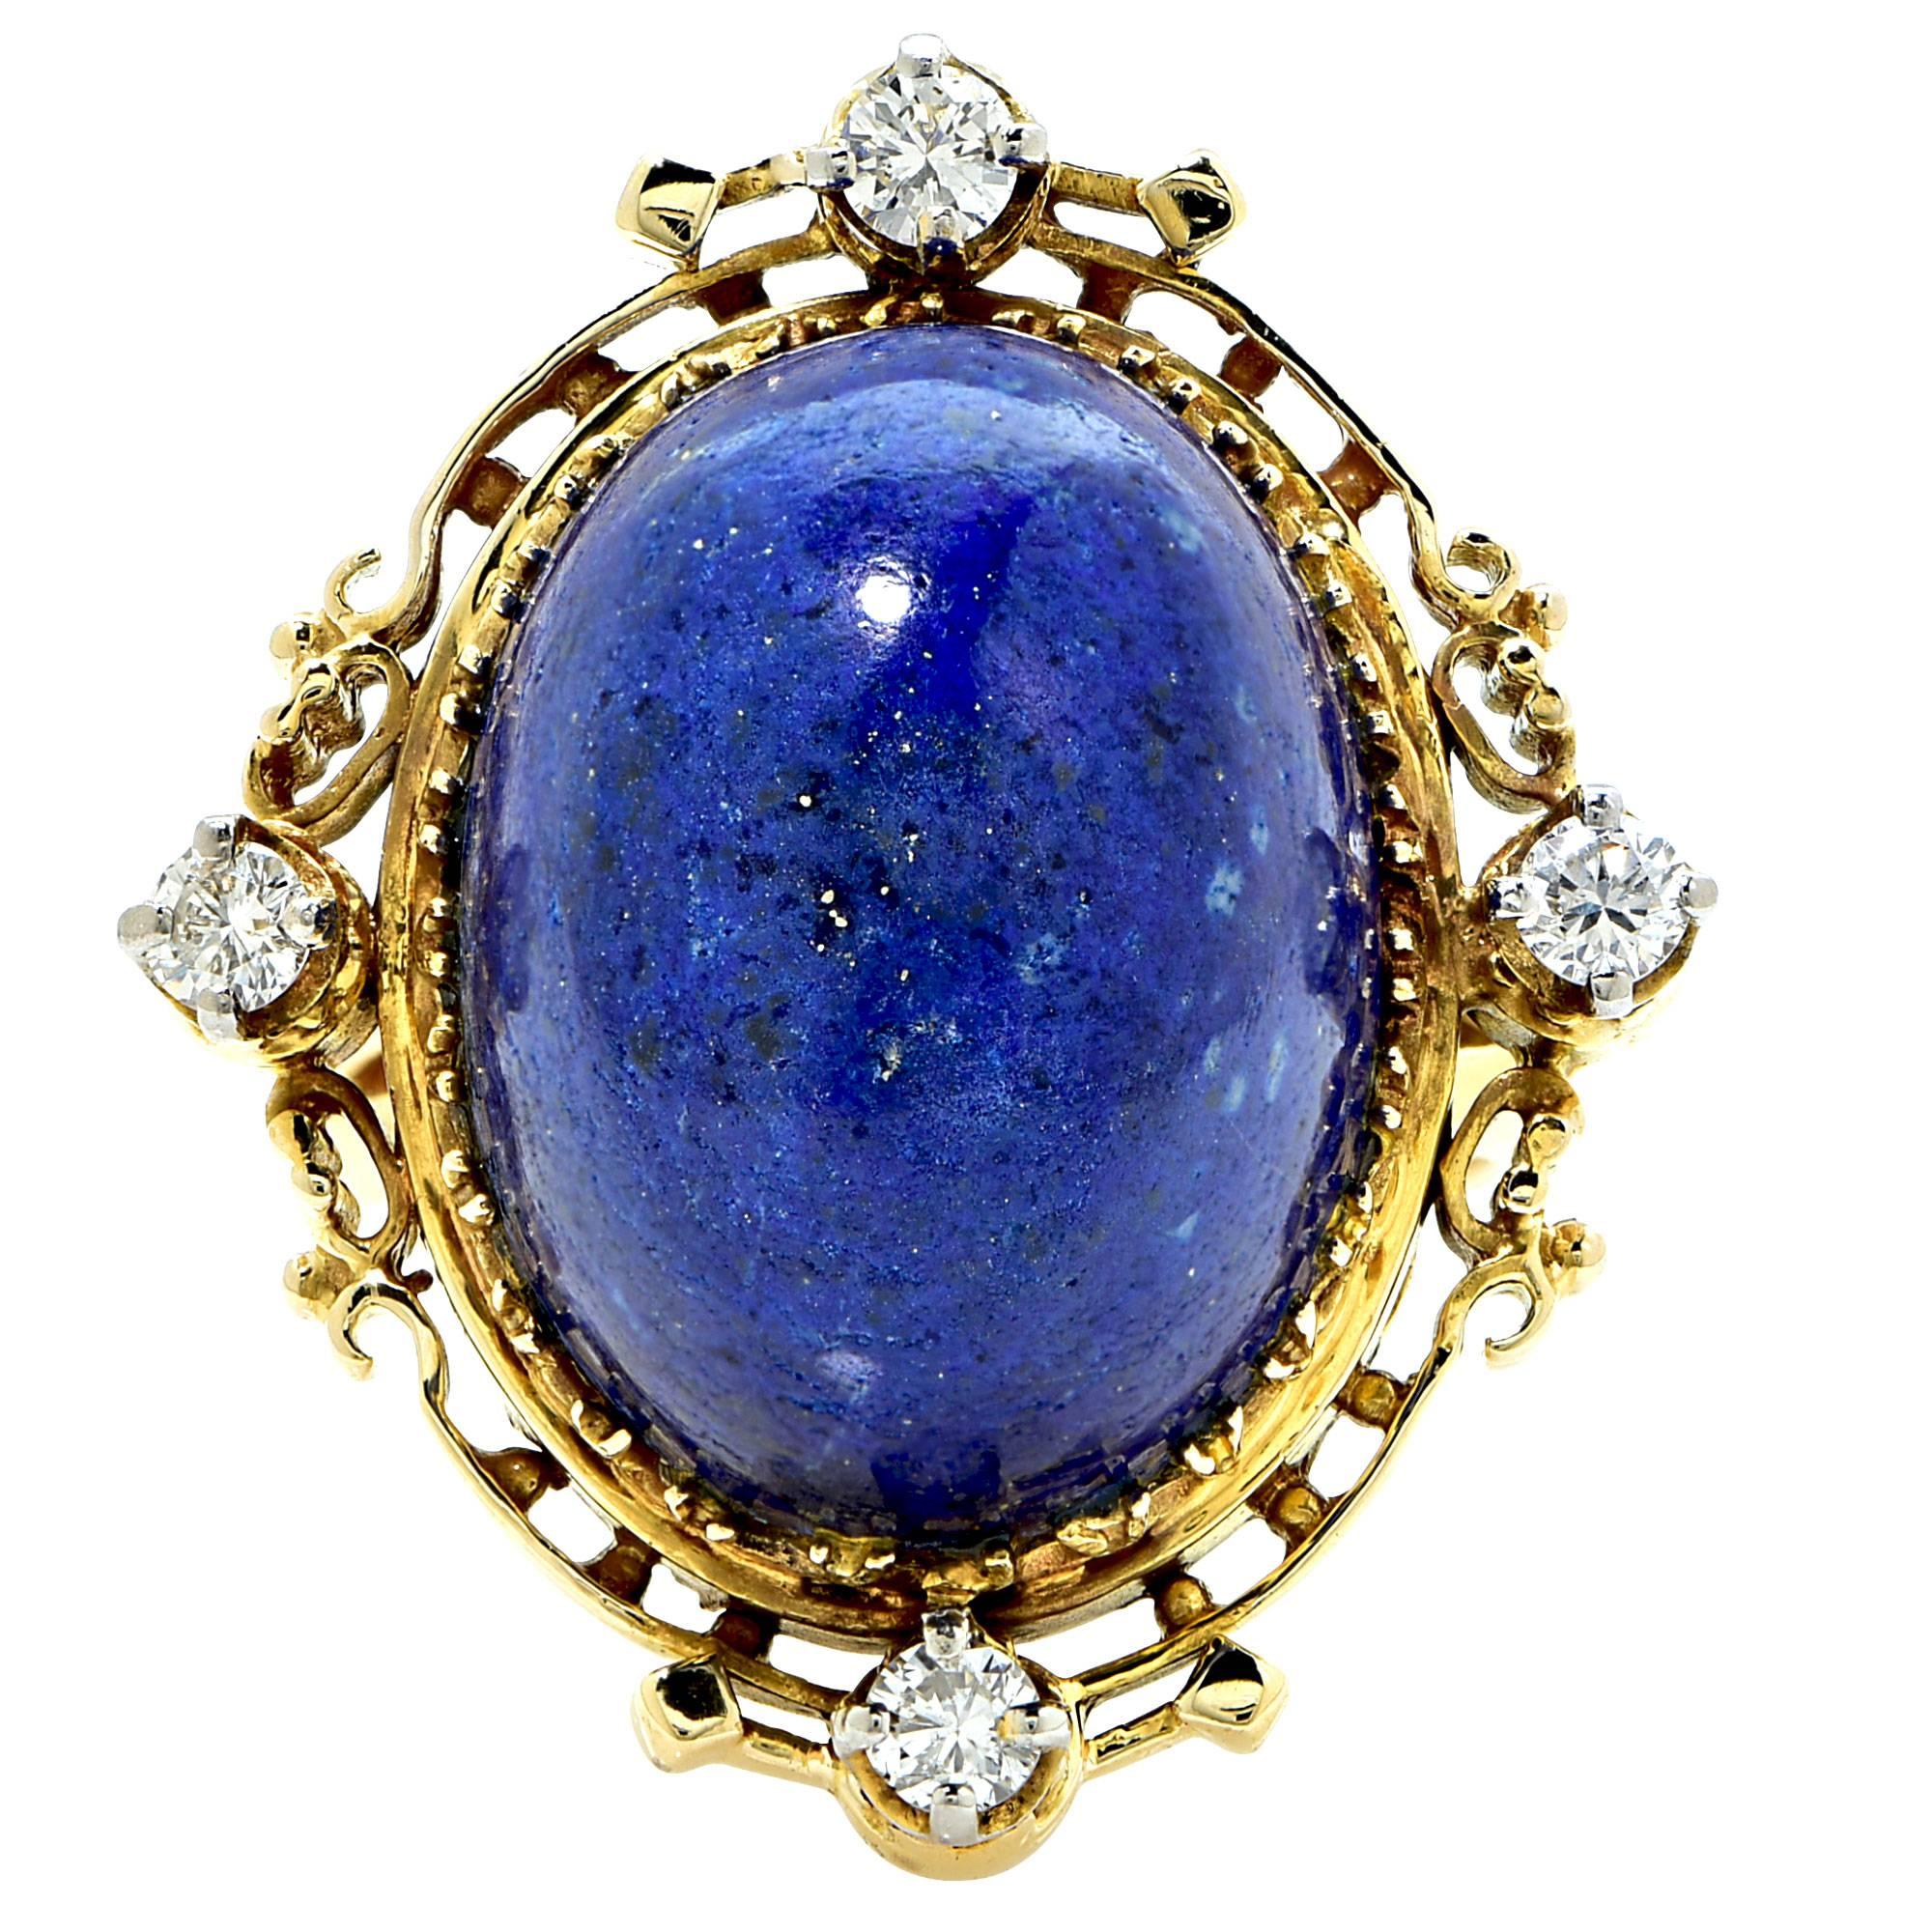 14k yellow gold ring featuring a lapis cabochon accented by 4 round brilliant cut diamonds weighing approximately .40cts total, G color VS clarity.

The ring is a size 5 and can be sized up or down.
It is stamped and tested as 14k gold.
The